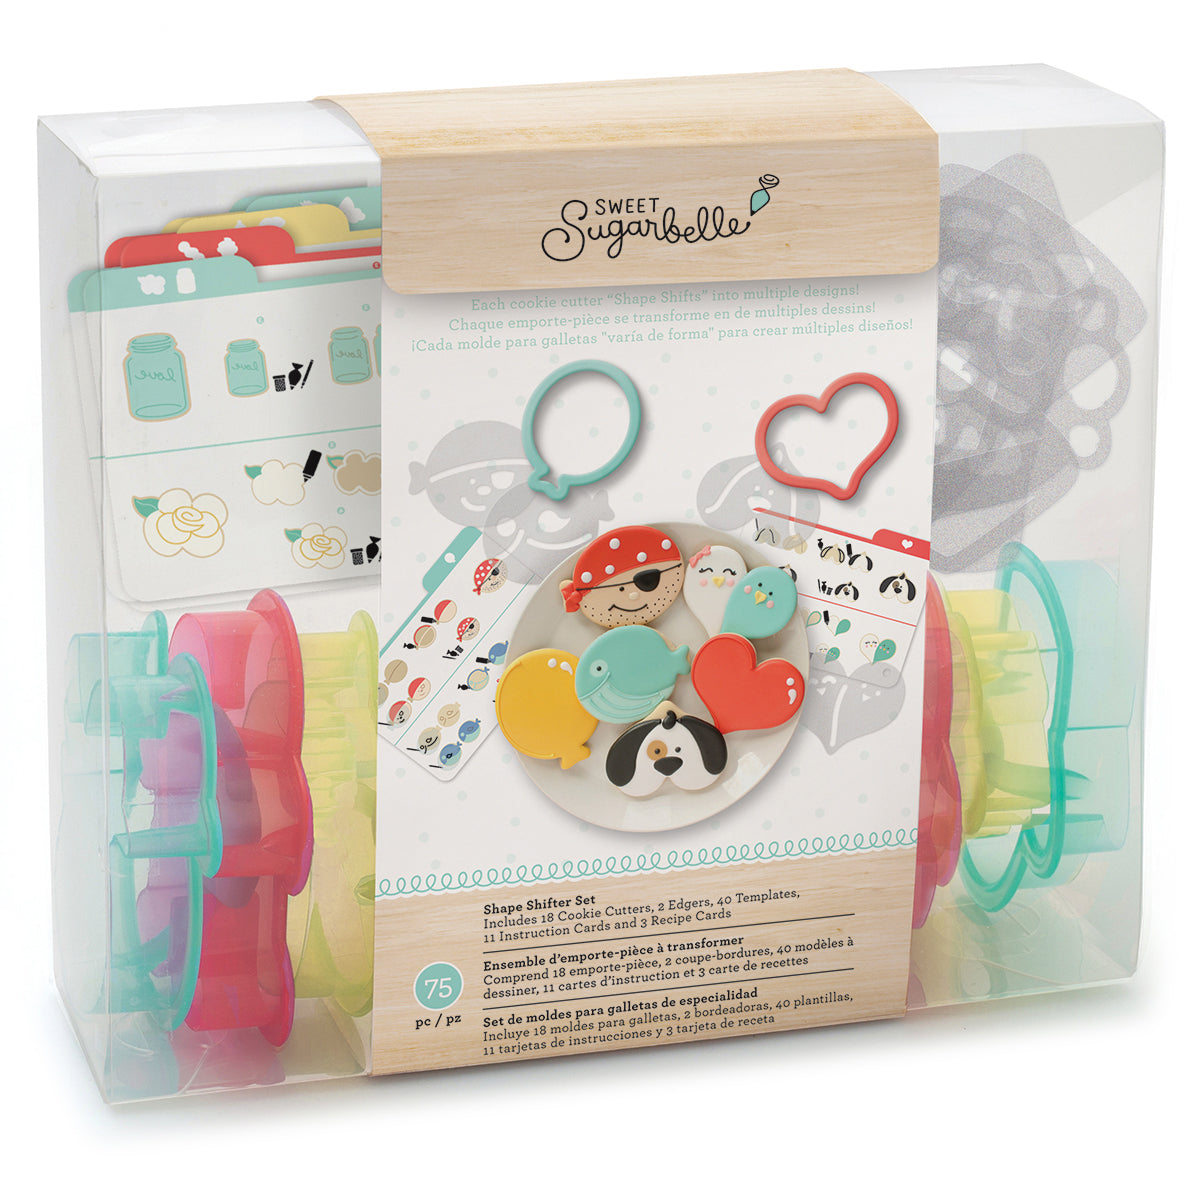 ArtSkills Sweet Spin Art, Includes Cookie Cutters and Recipe Cards